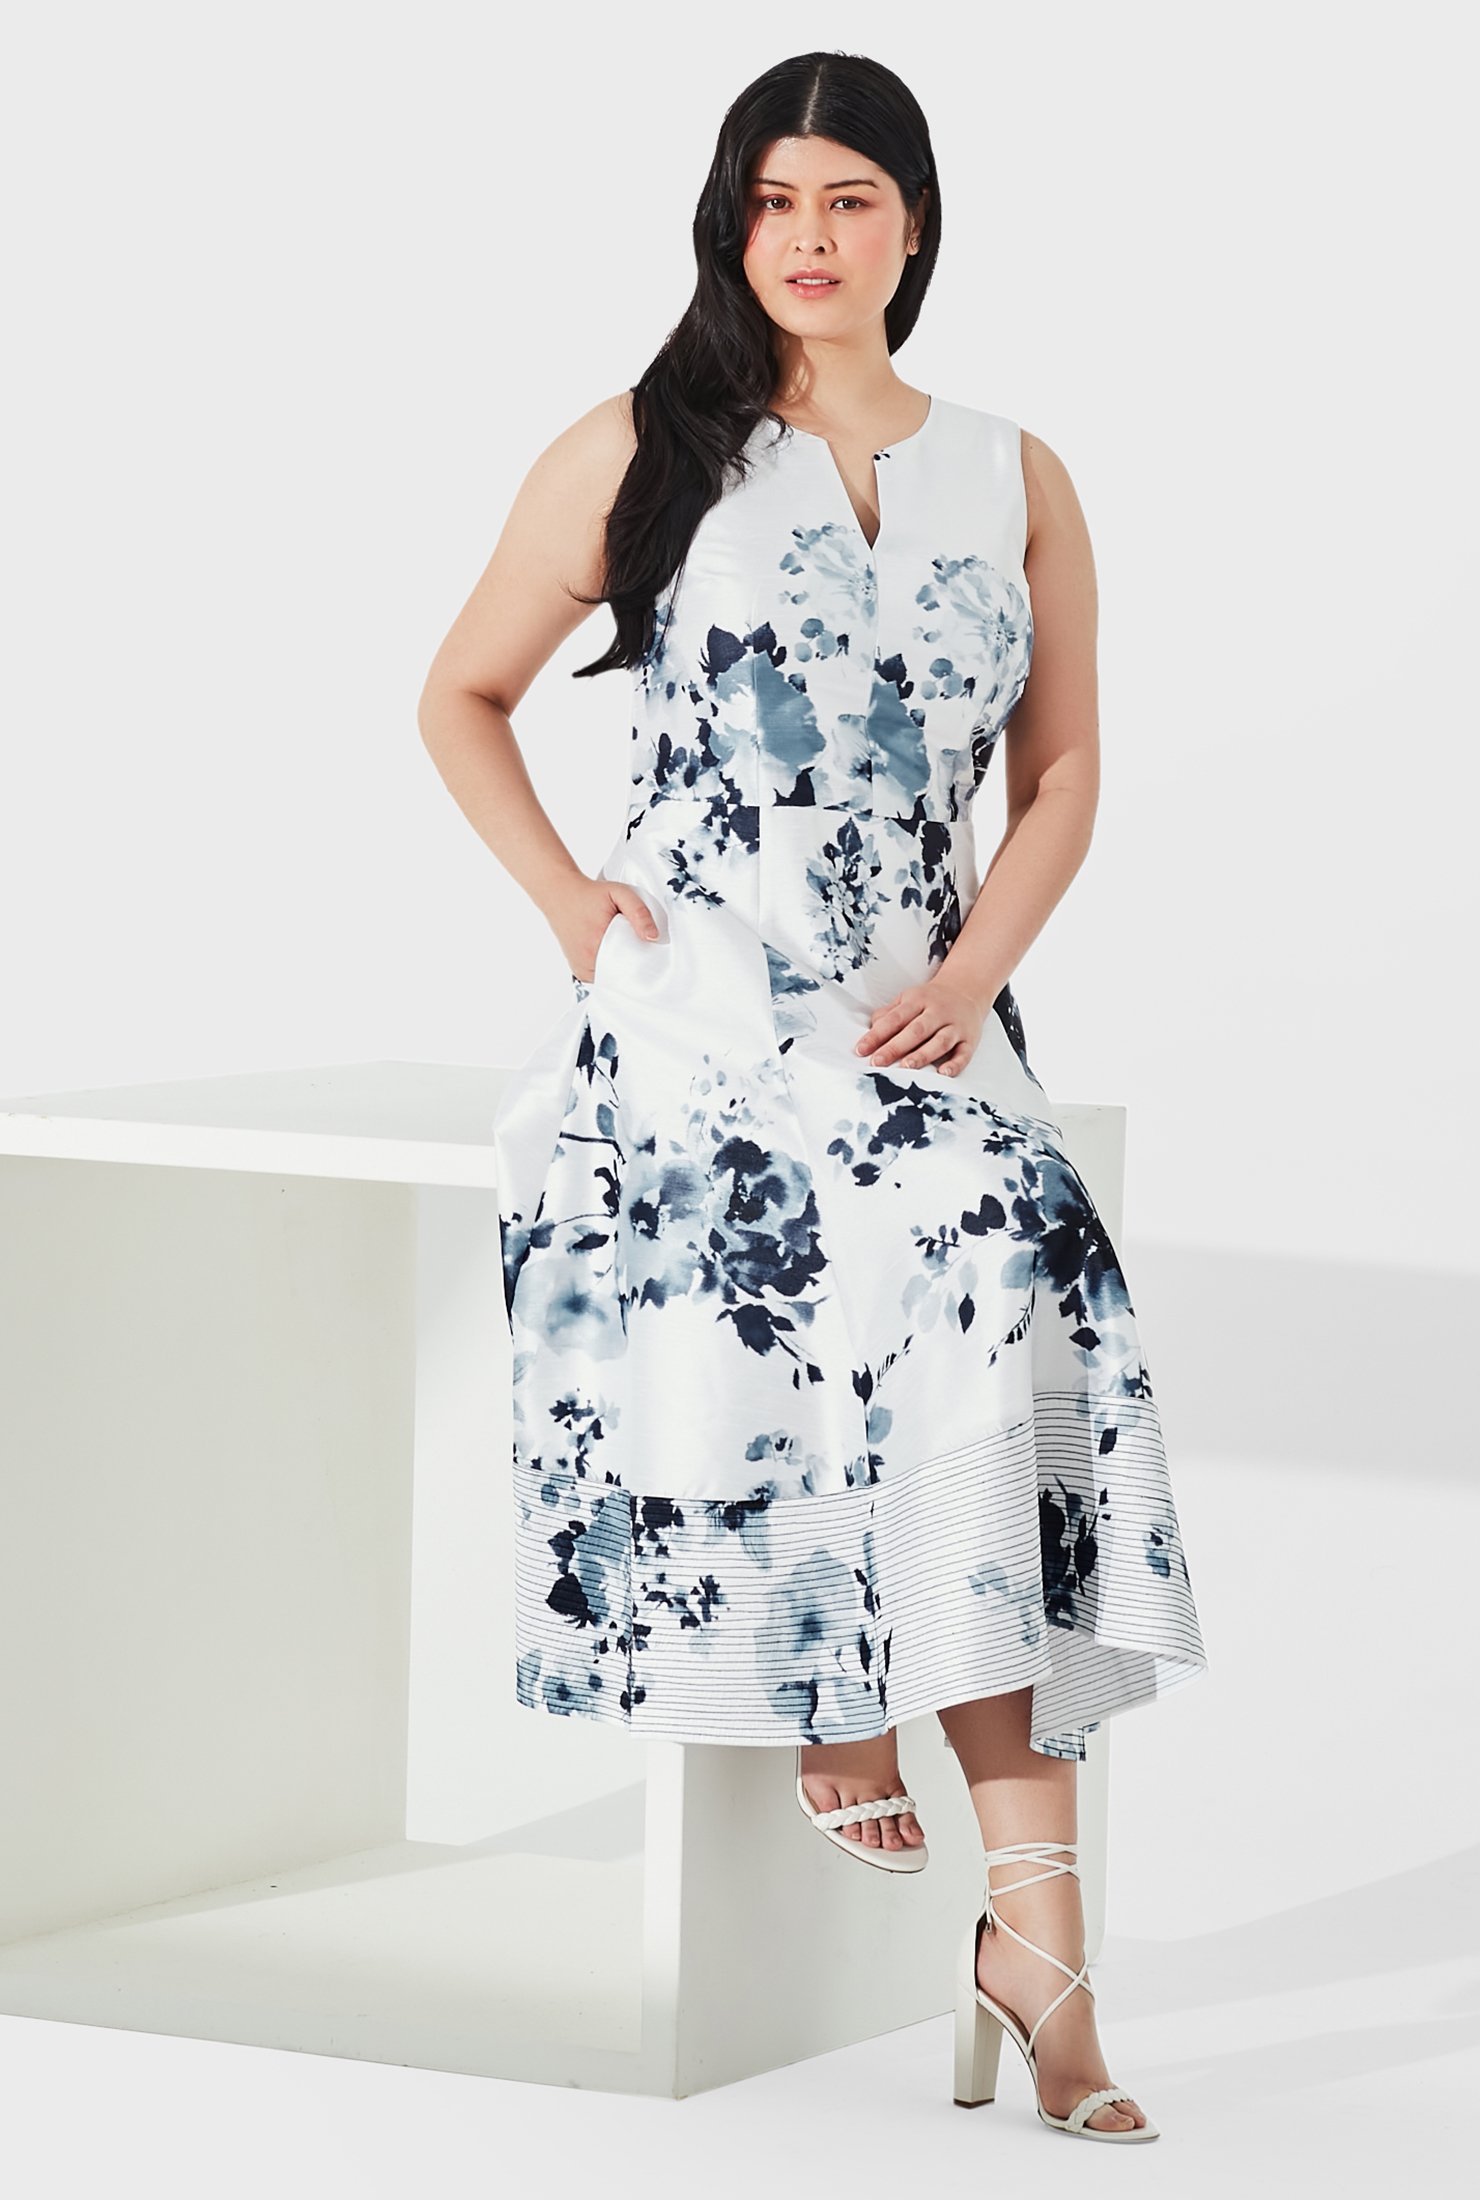 Slip on our floral print dupioni dress and look polished in minutes flat while a trapunto stitch hemline completes the party look.